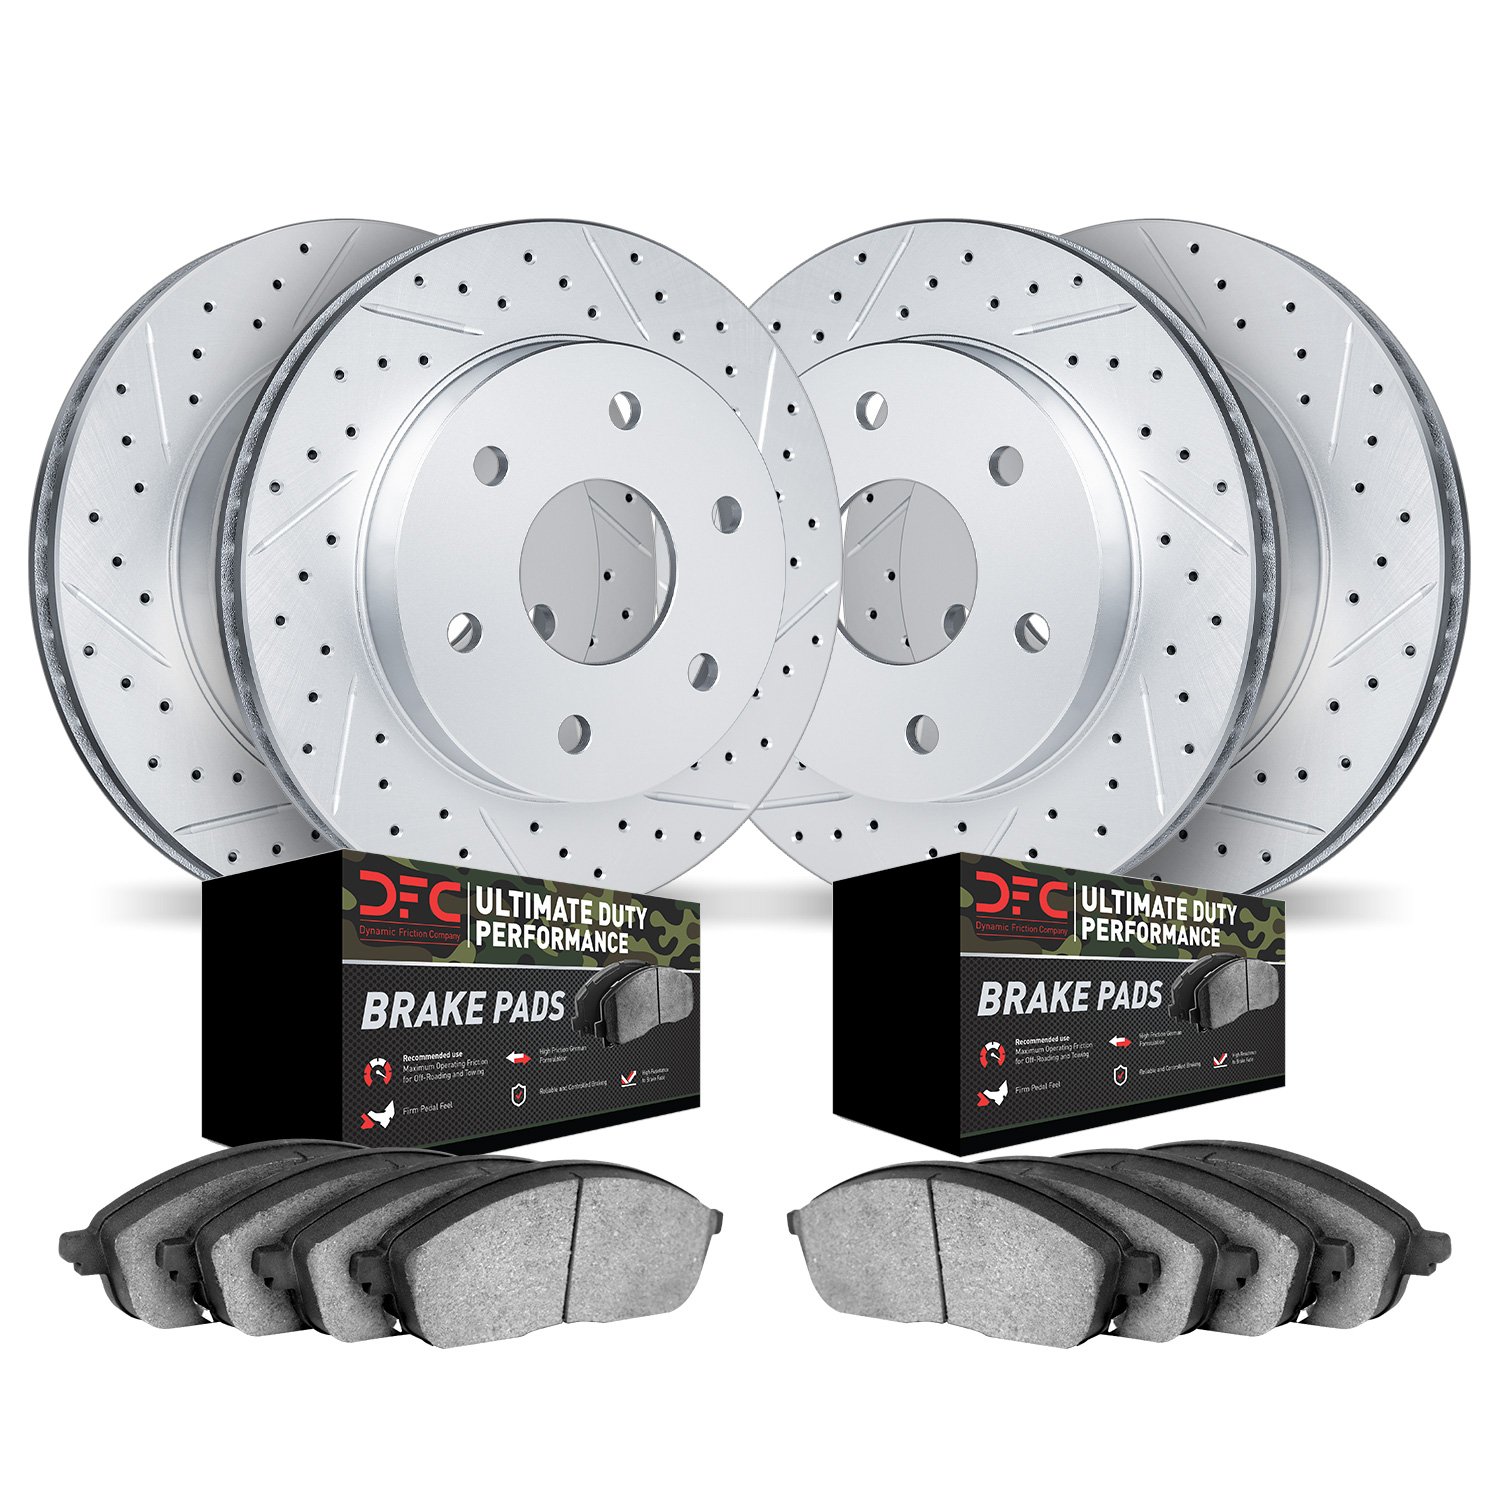 2404-76002 Geoperformance Drilled/Slotted Brake Rotors with Ultimate-Duty Brake Pads Kit, 2001-2007 Lexus/Toyota/Scion, Position